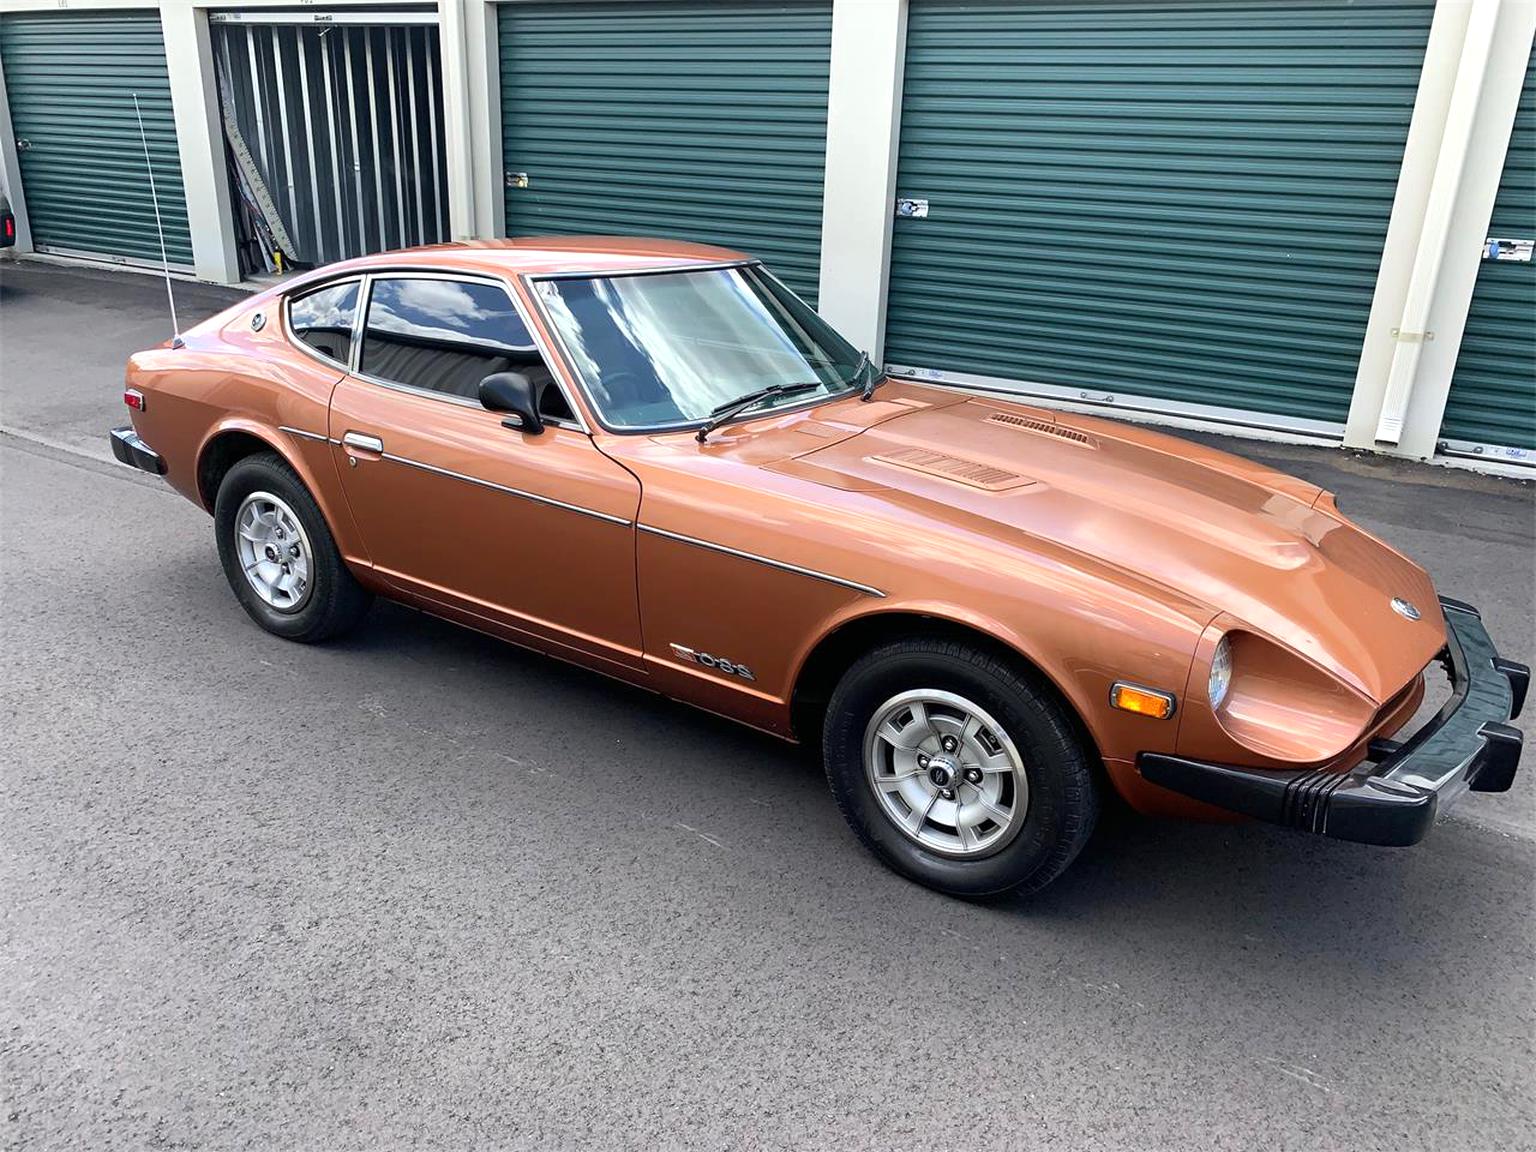 Datsun 280Z for sale in UK | 61 second-hand Datsun 280Zs